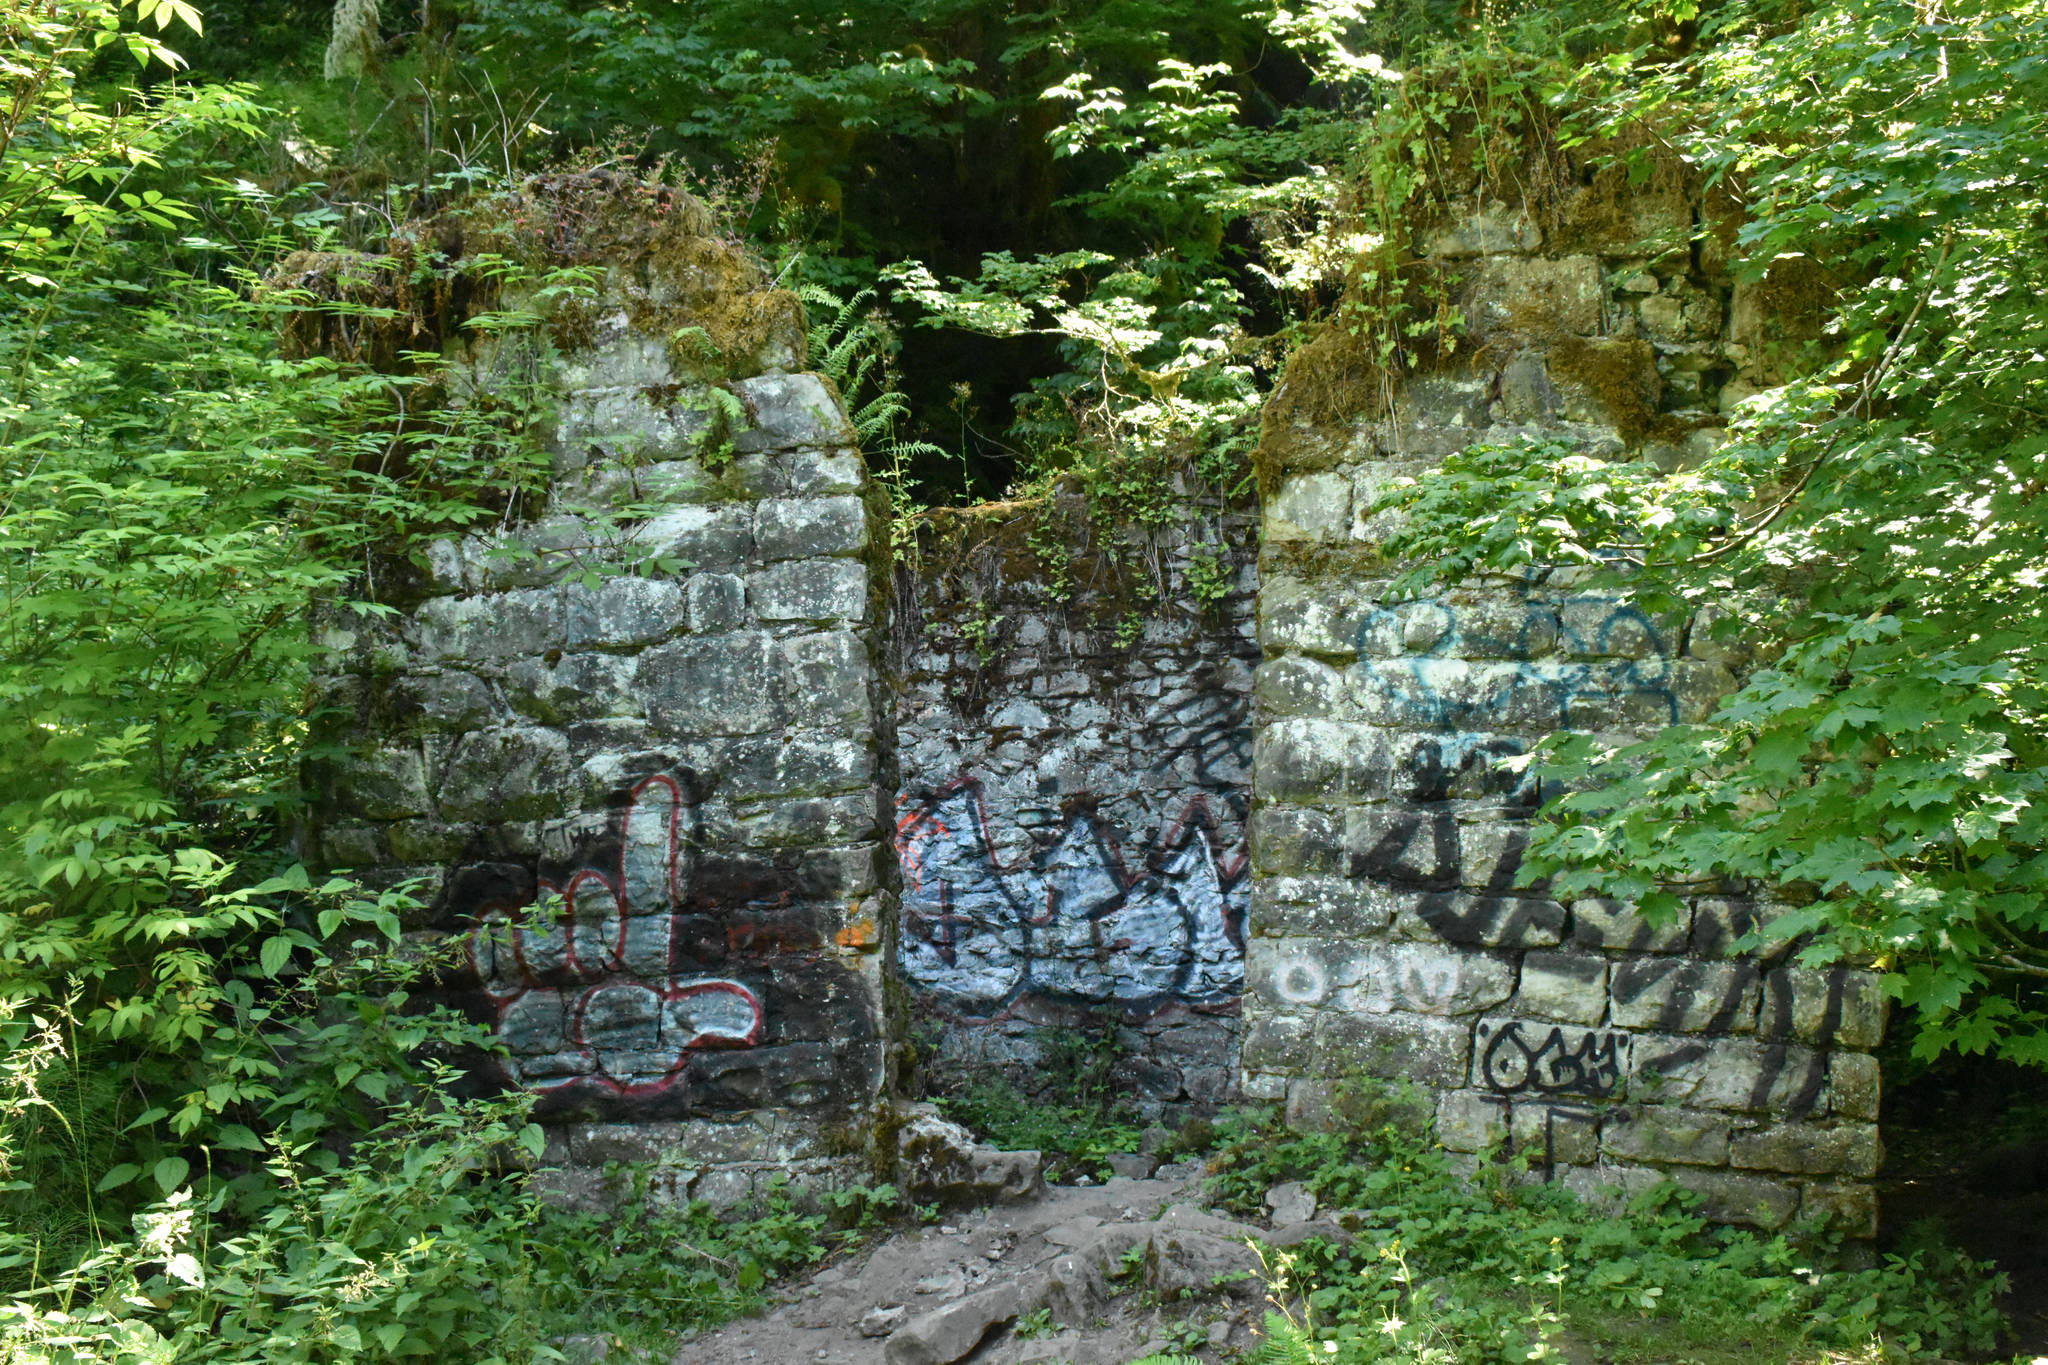 PHOTOS BY KEVIN HANSON
Most visitors to the Melmont Ghost Town trail park at a Pierce County entrance. Along the way, hikers discover a former dynamite shed and the standing remains of the Melmont school. The trail leads guests under the towering Fairfax Bridge.